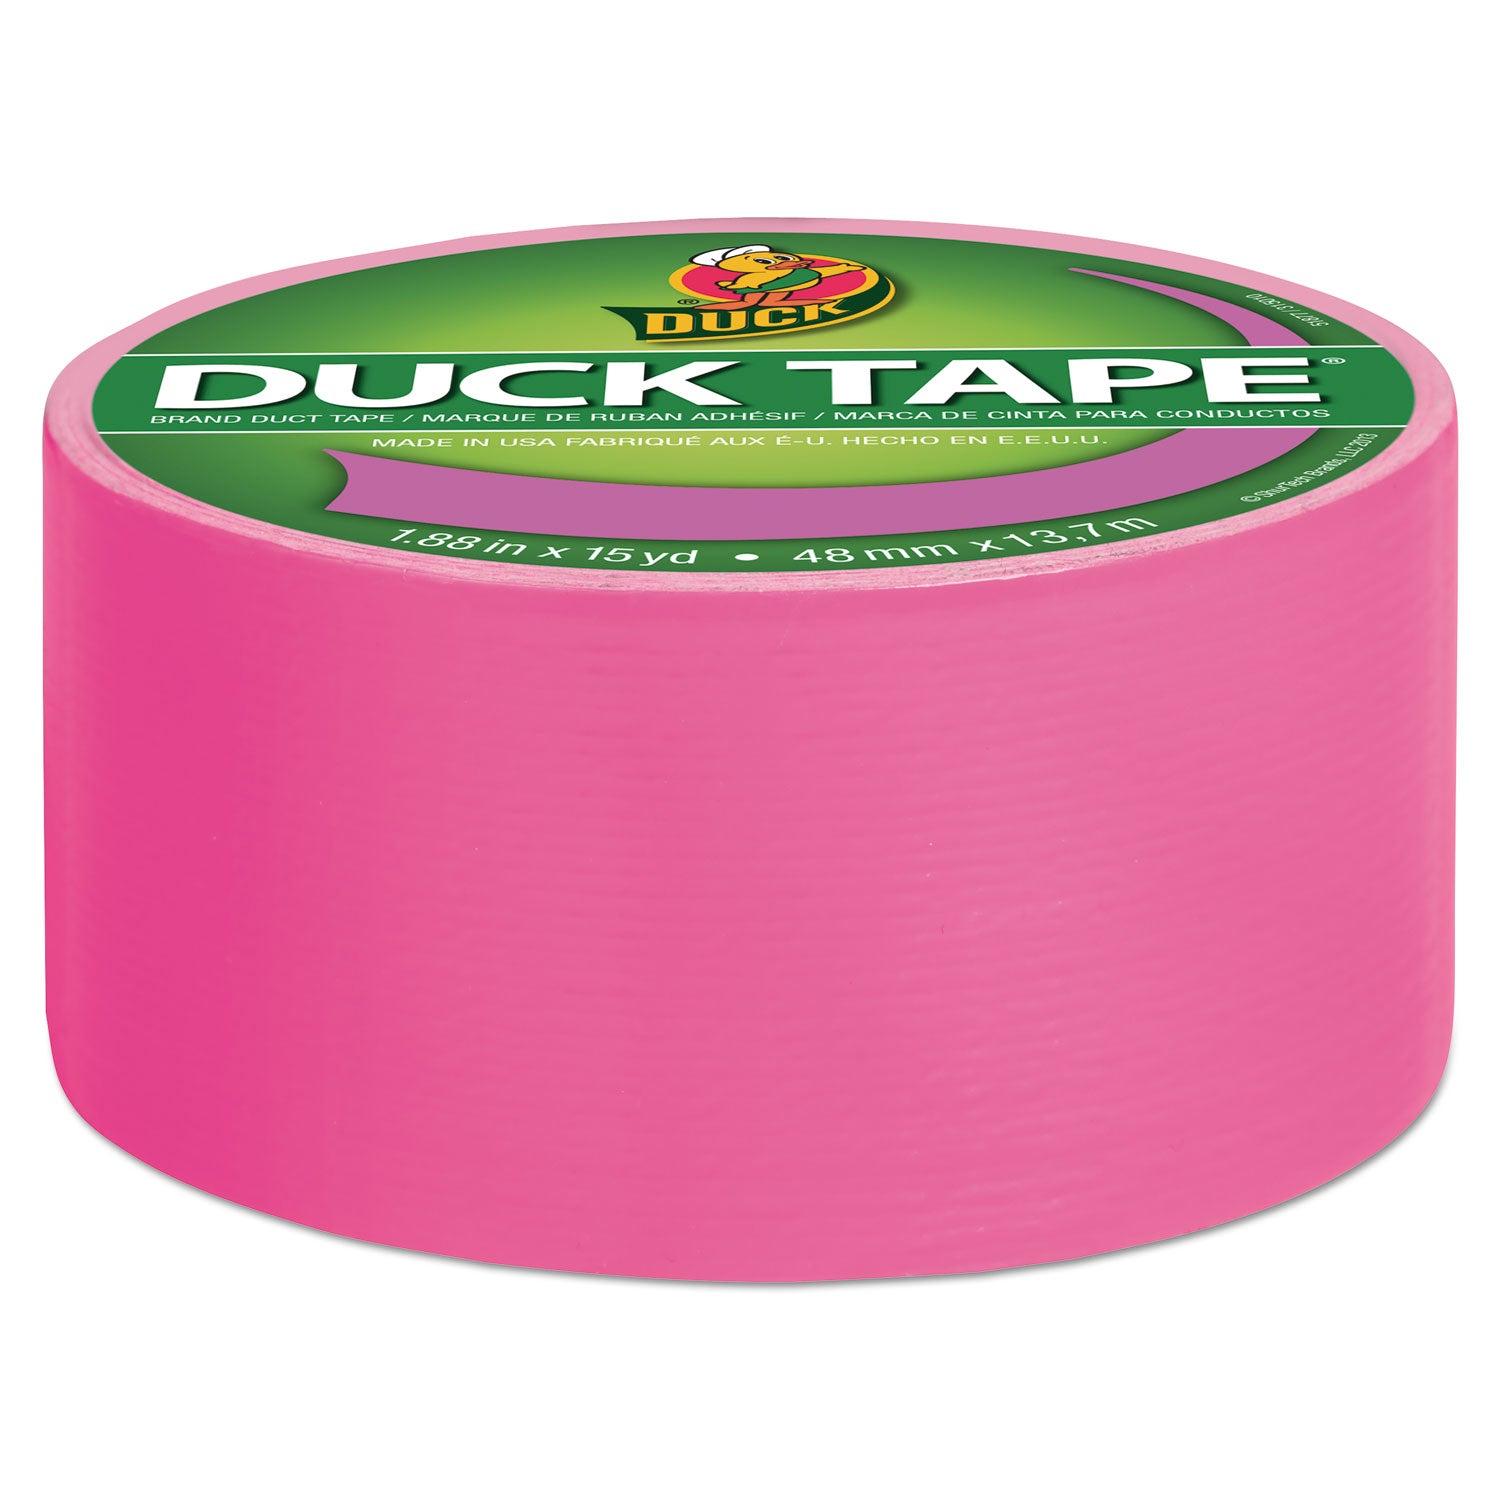 Colored Duct Tape, 3" Core, 1.88" x 15 yds, Neon Pink - 